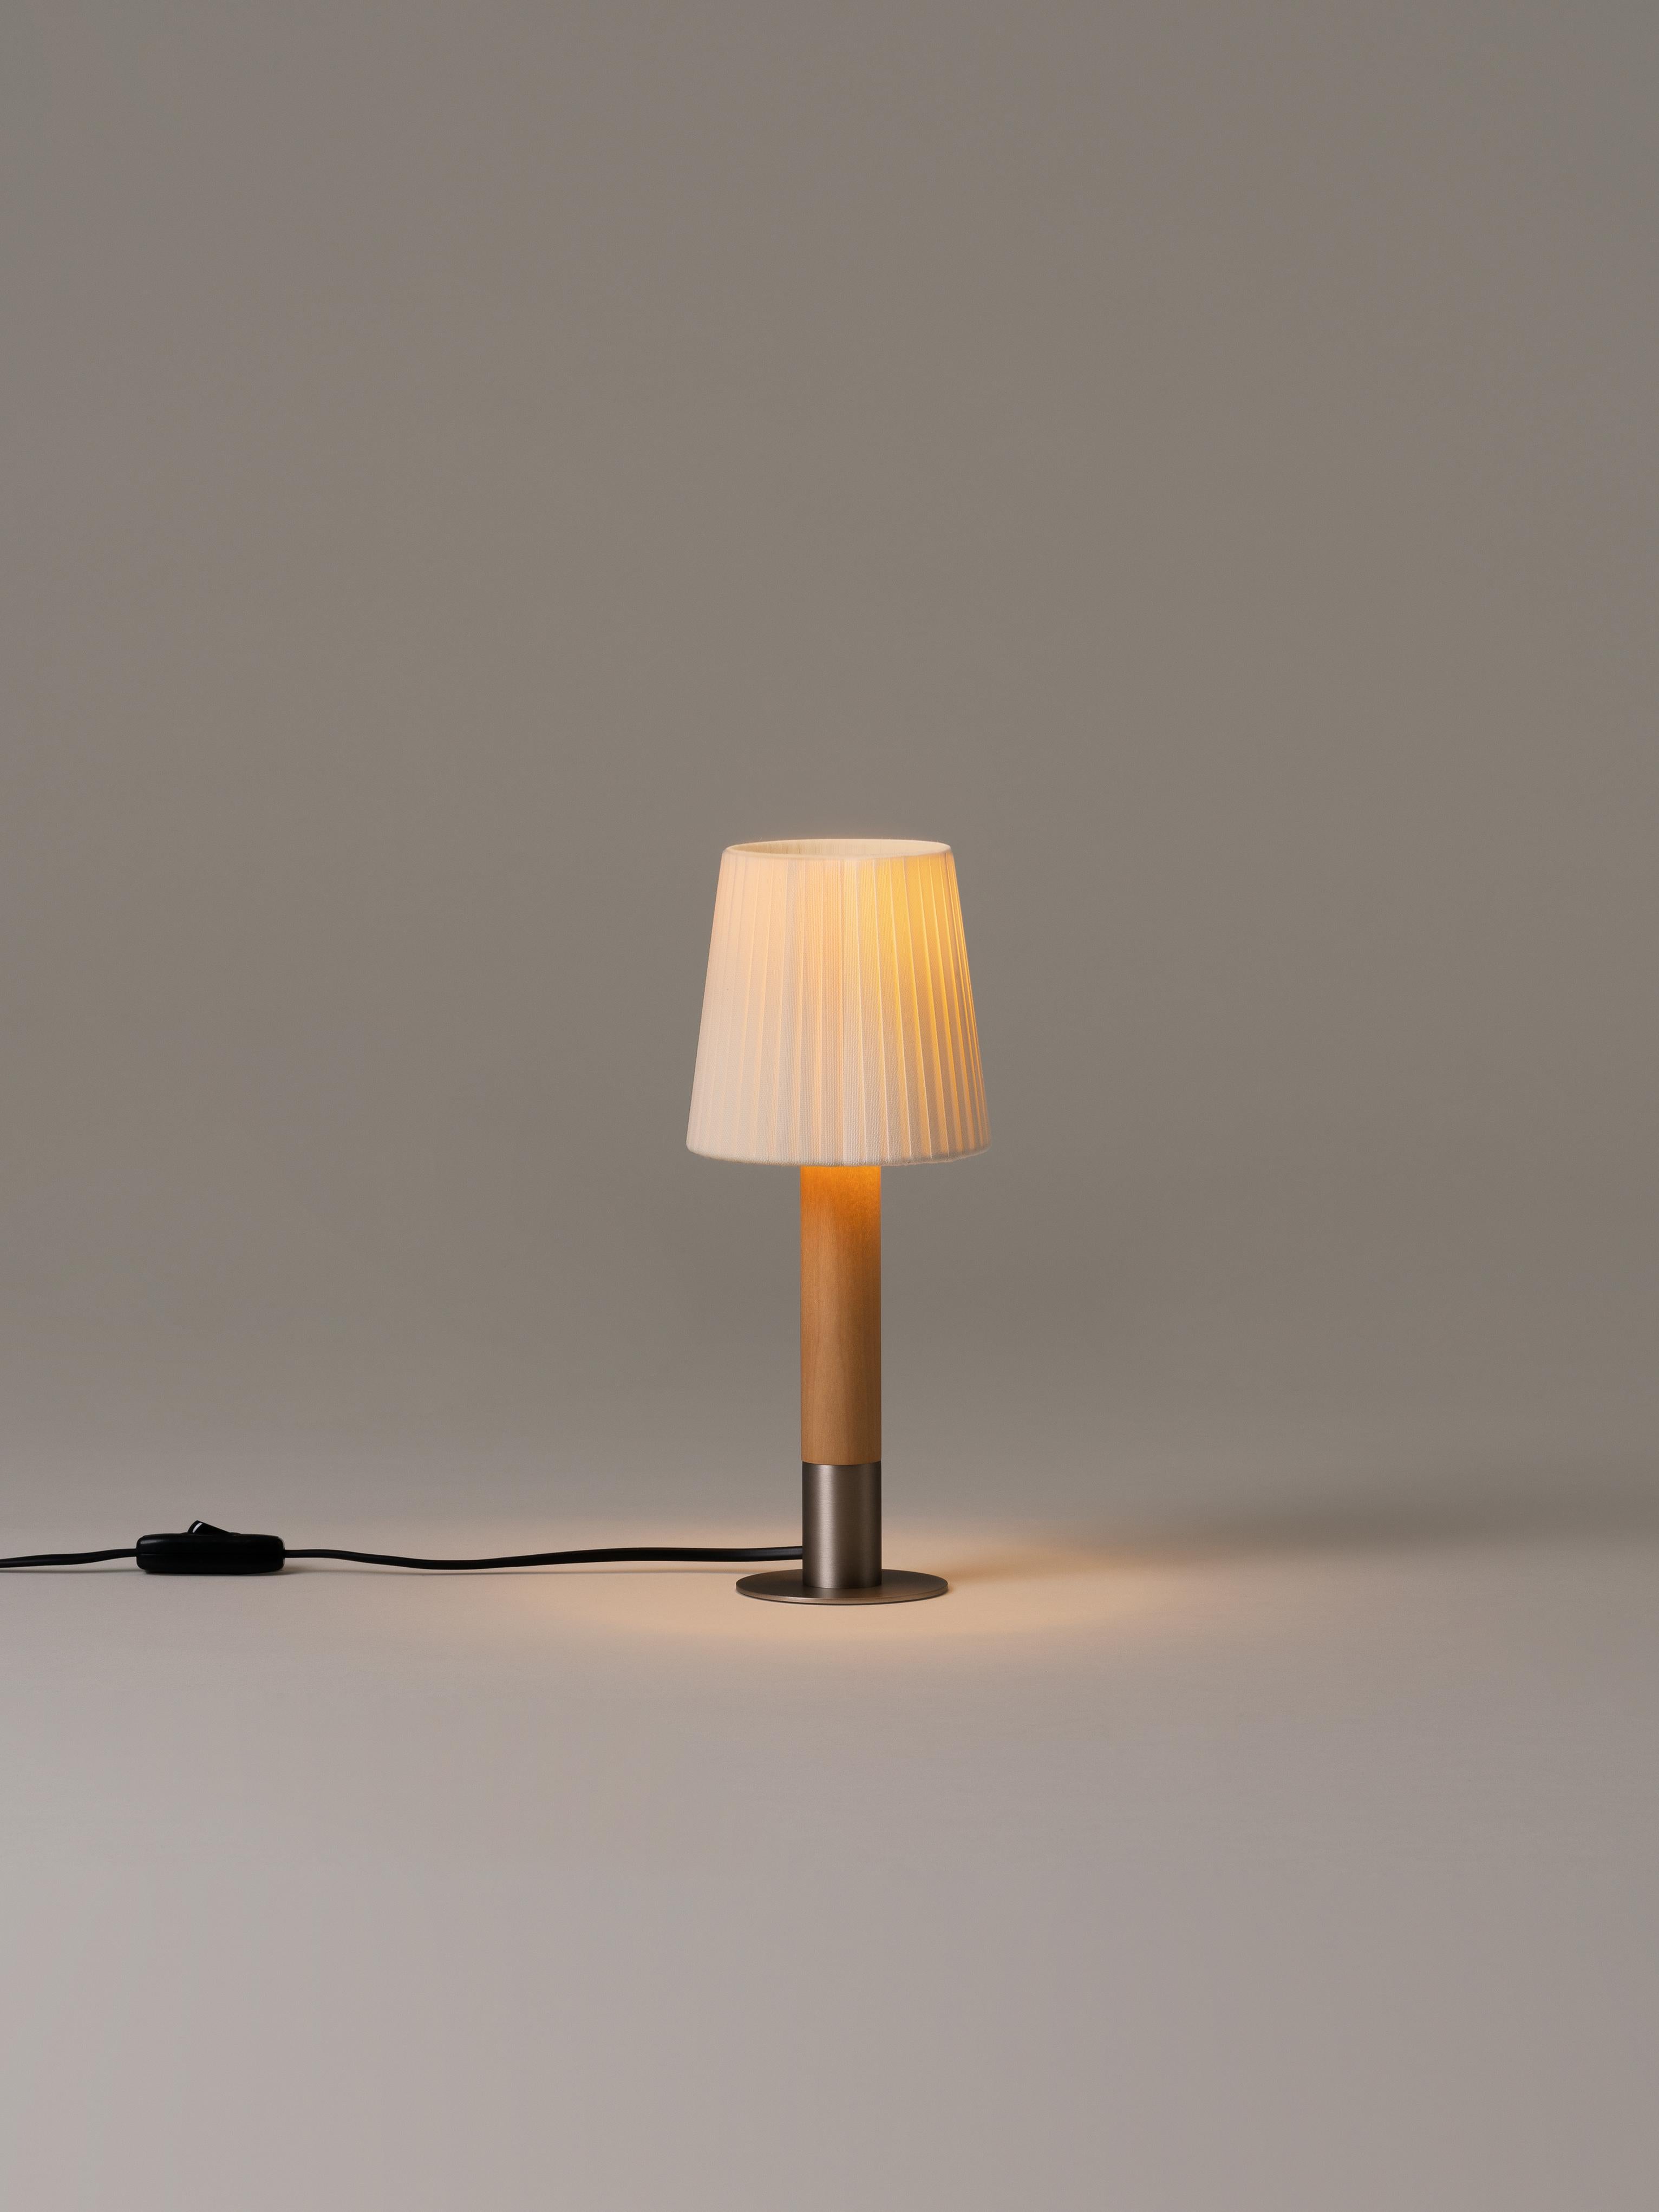 Nickel Básica Mínima table lamp by Santiago Roqueta, Santa & Cole.
Dimensions: D 12 x H 30 cm.
Materials: Nickel, birch wood, ribbon.

Básica Mínima is the pocket edition of the Básica lamp. On its own or with others, it combines sturdiness and